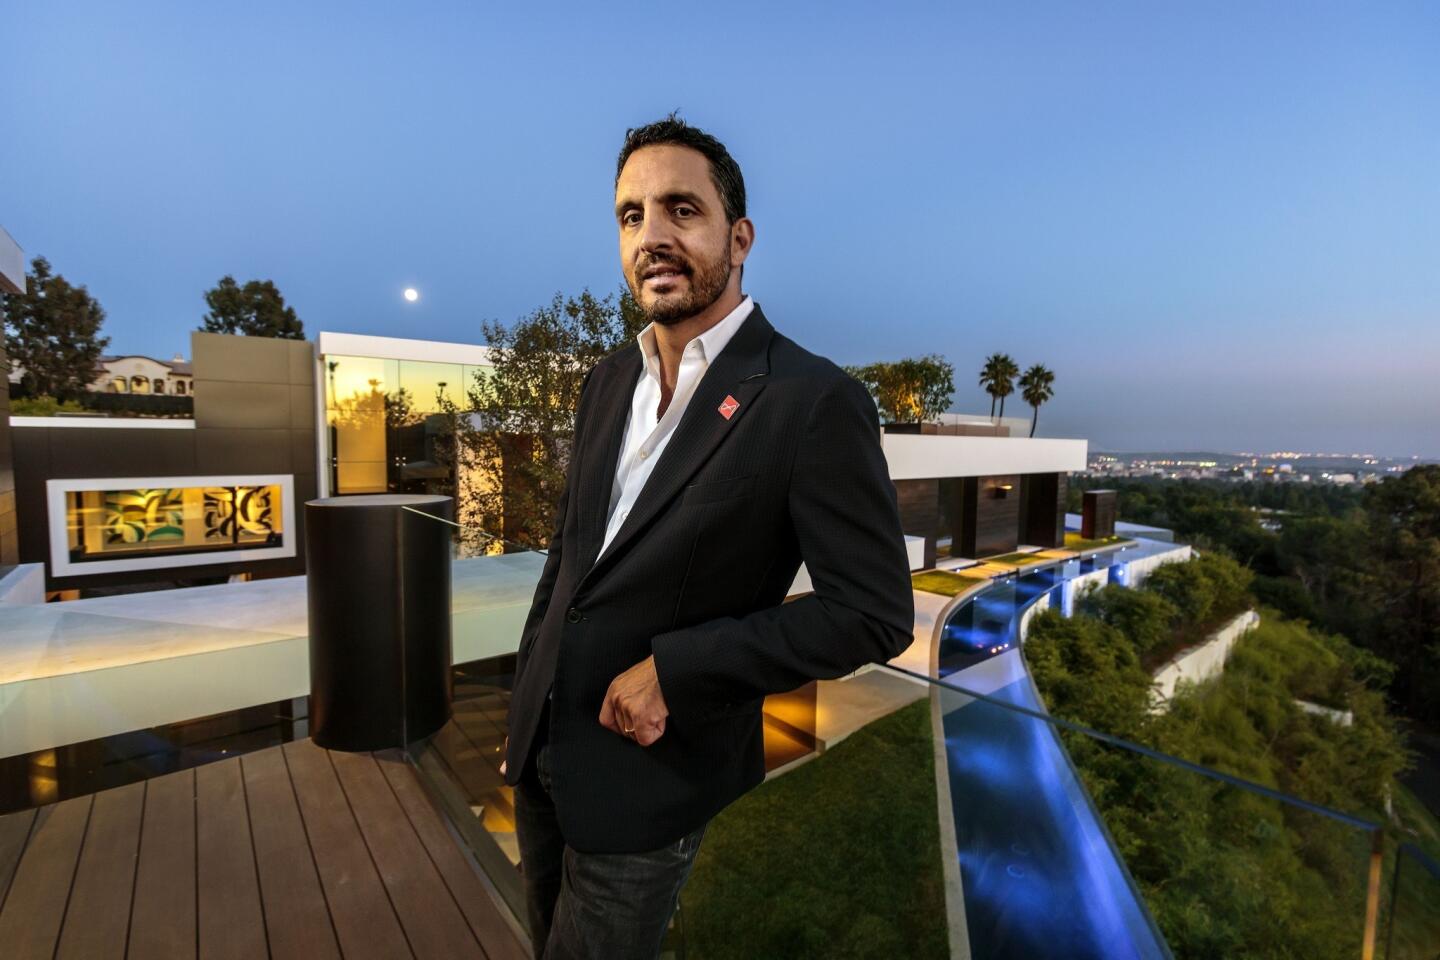 Real estate agent Mauricio Umansky is selling a $36 million Beverly Hills home that is move-in ready. It even includes a $300 putter for the putting green.